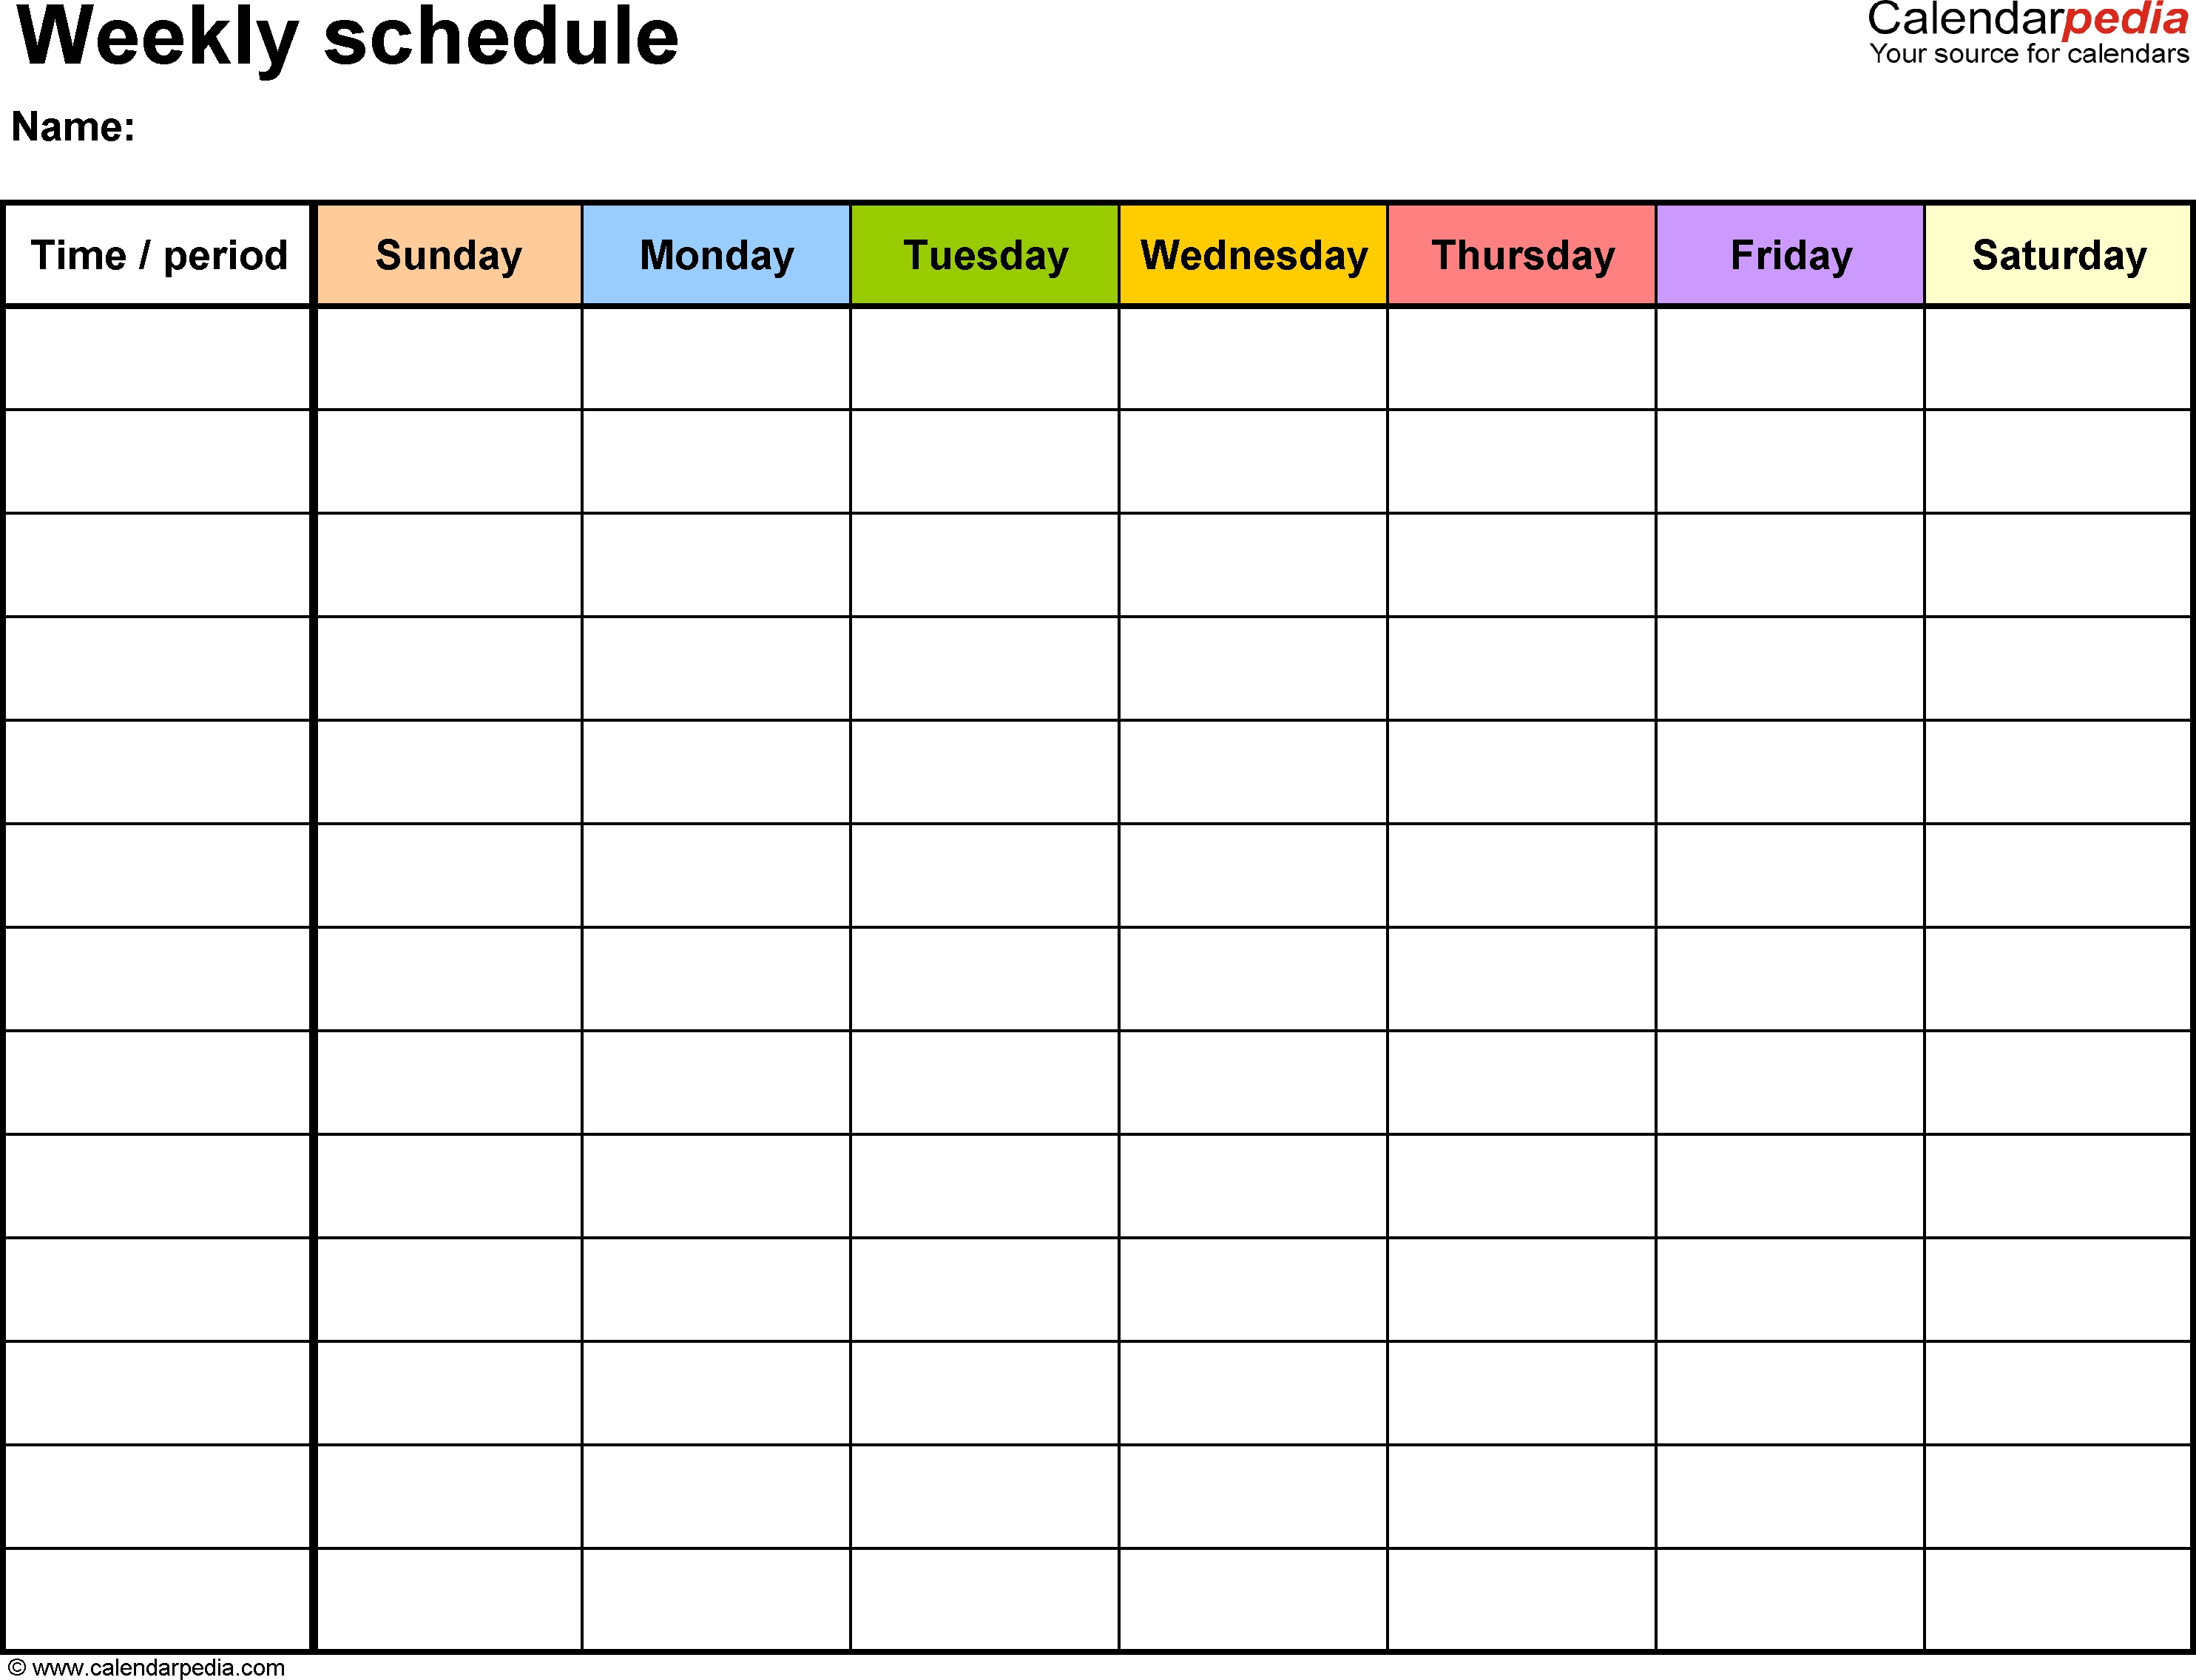 Free Weekly Schedule Templates For Excel - 18 Templates Remarkable 5 Week Blank Calendar Template